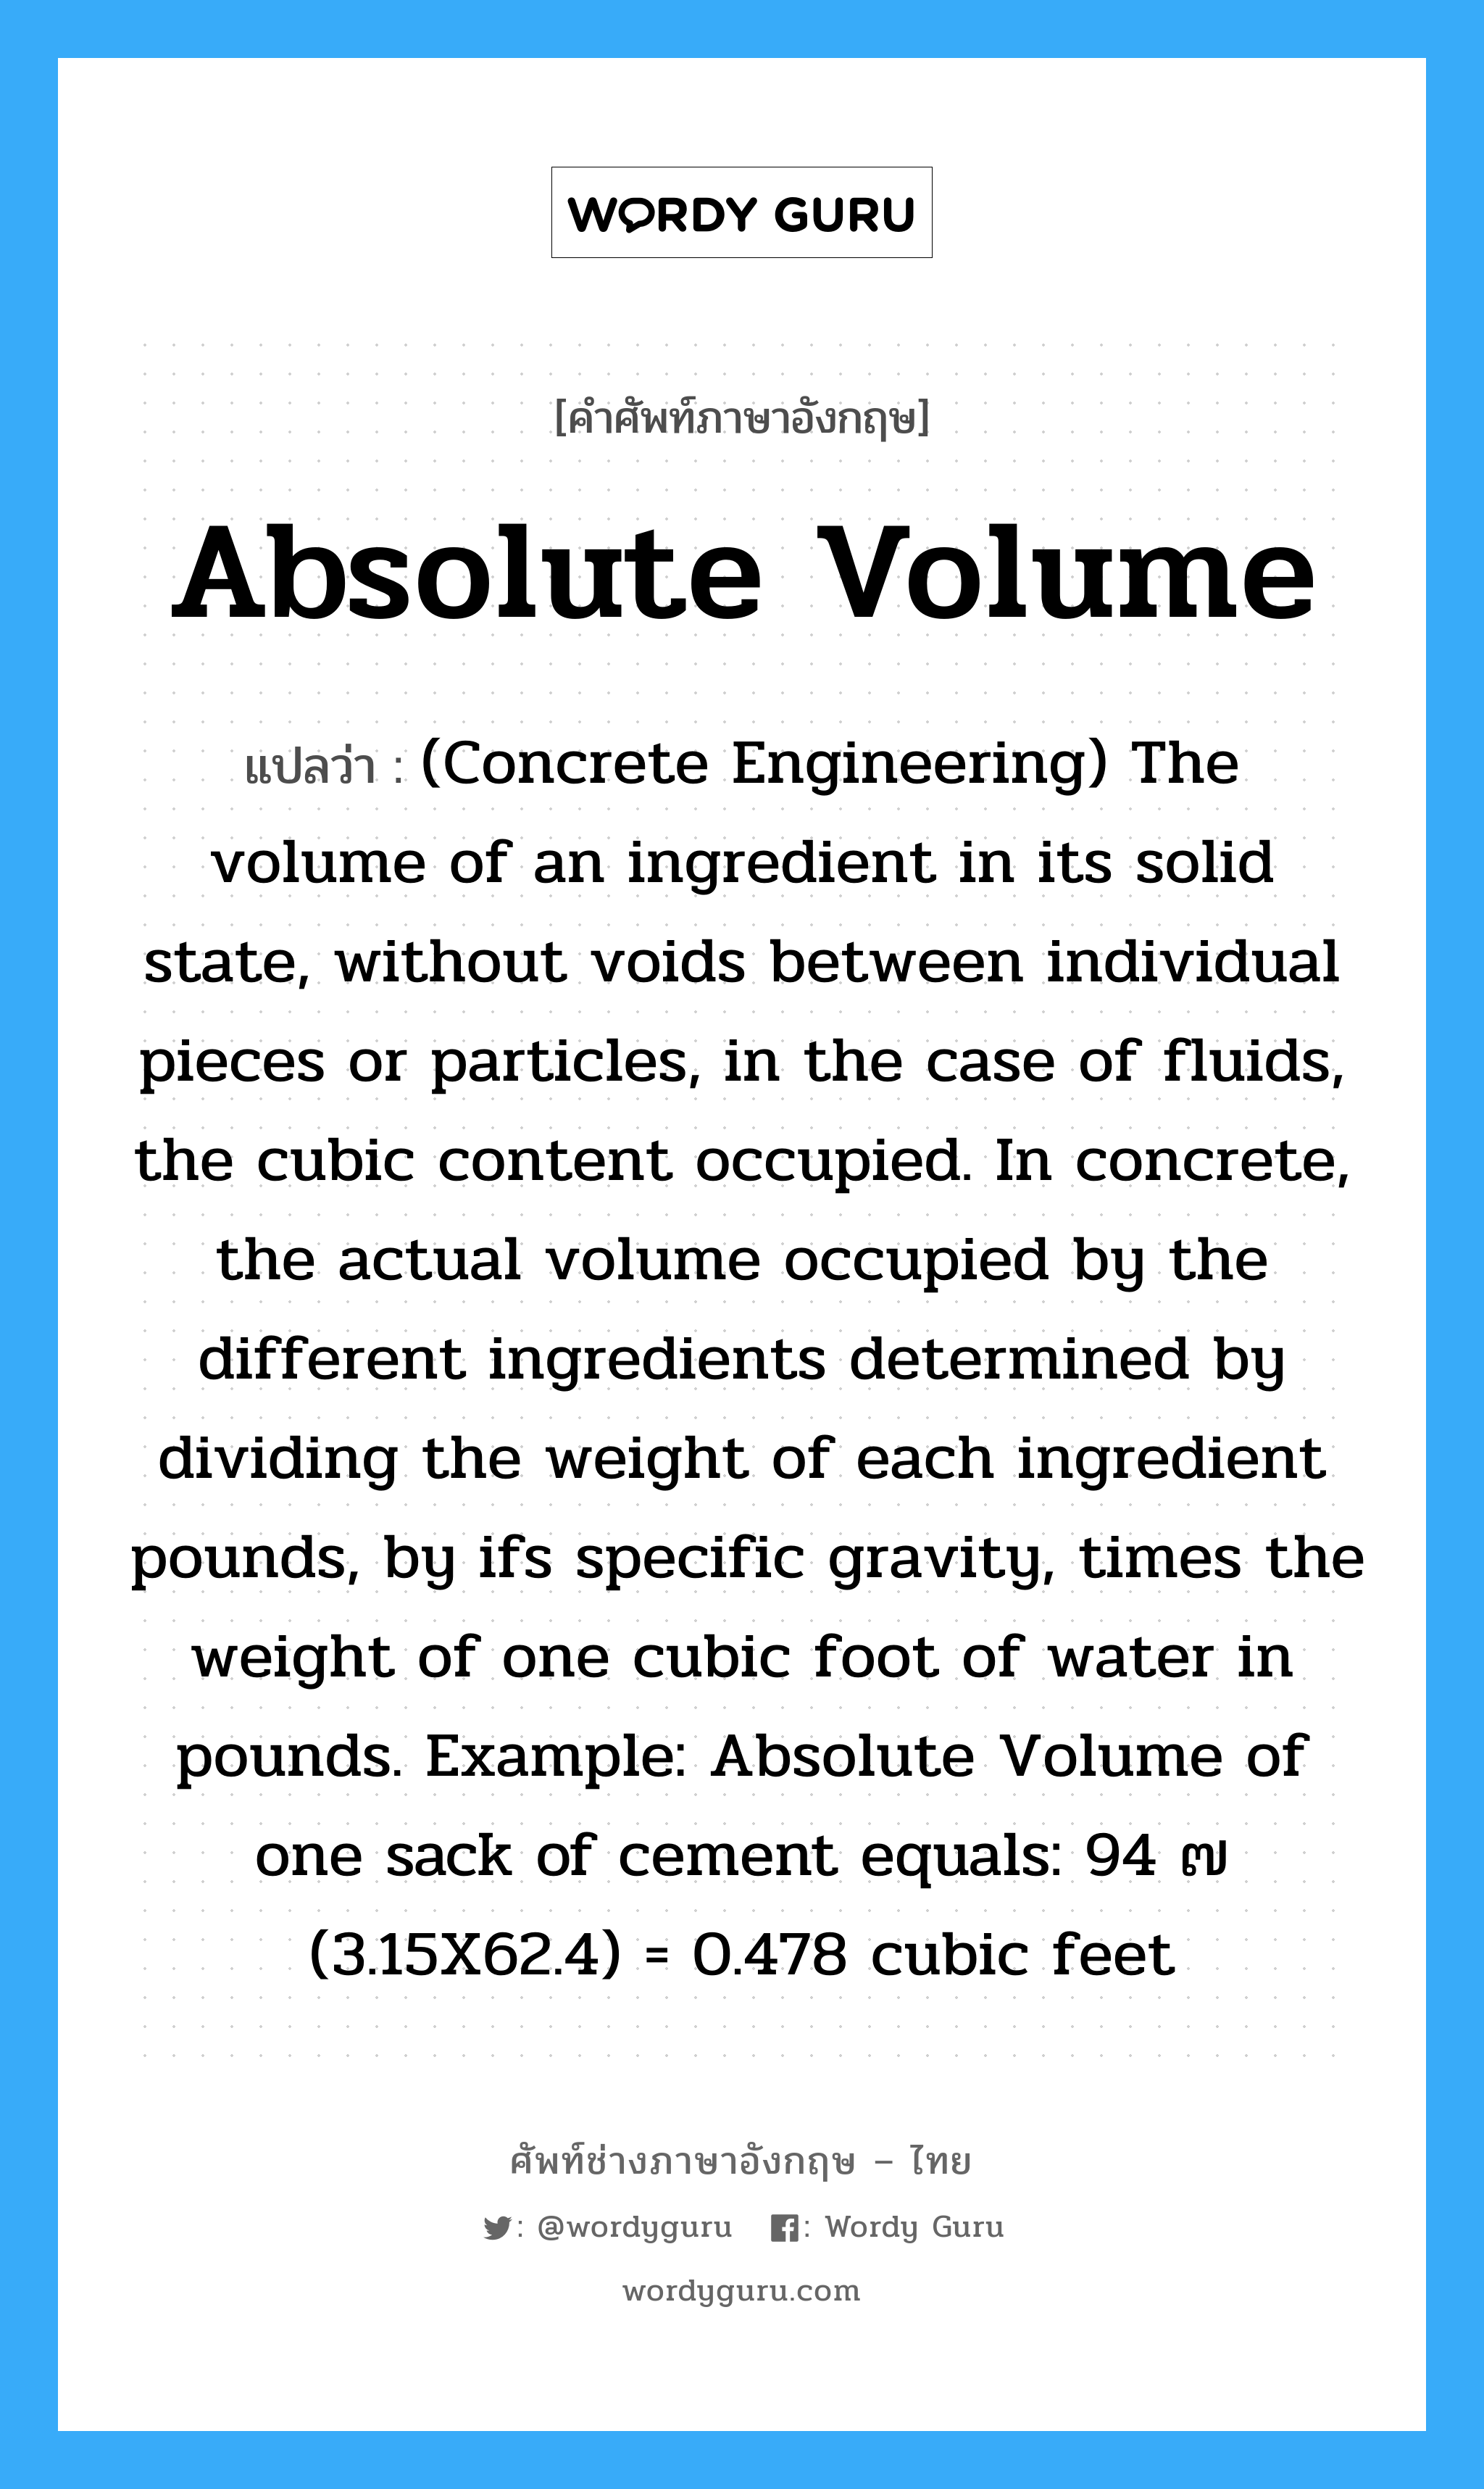 Absolute Volume แปลว่า?, คำศัพท์ช่างภาษาอังกฤษ - ไทย Absolute Volume คำศัพท์ภาษาอังกฤษ Absolute Volume แปลว่า (Concrete Engineering) The volume of an ingredient in its solid state, without voids between individual pieces or particles, in the case of fluids, the cubic content occupied. In concrete, the actual volume occupied by the different ingredients determined by dividing the weight of each ingredient pounds, by ifs specific gravity, times the weight of one cubic foot of water in pounds. Example: Absolute Volume of one sack of cement equals: 94 ๗ (3.15X62.4) = 0.478 cubic feet